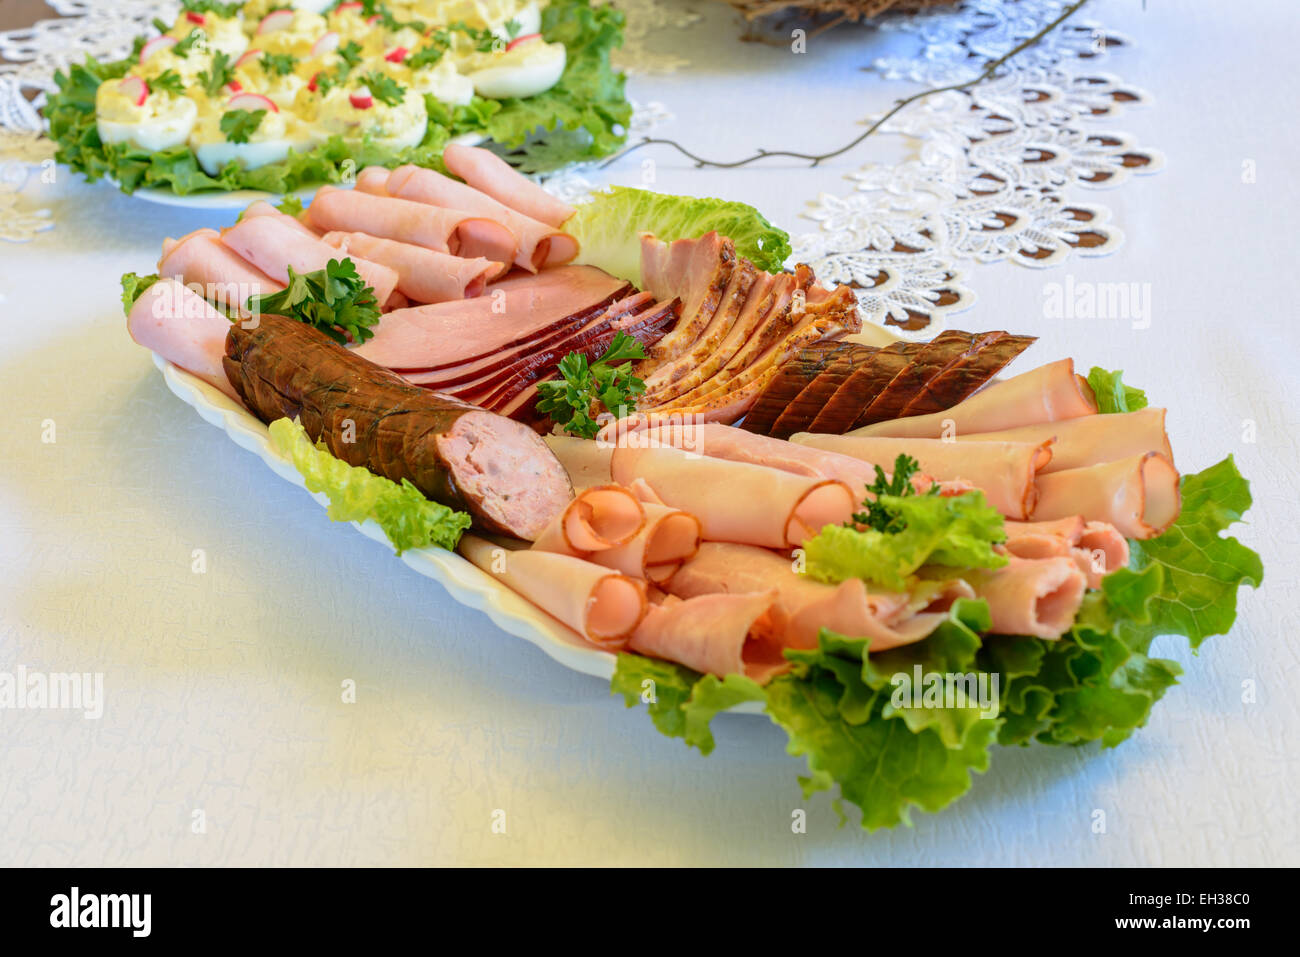 Assorted sliced ham, sausage and turkey arranged on a plate Stock Photo